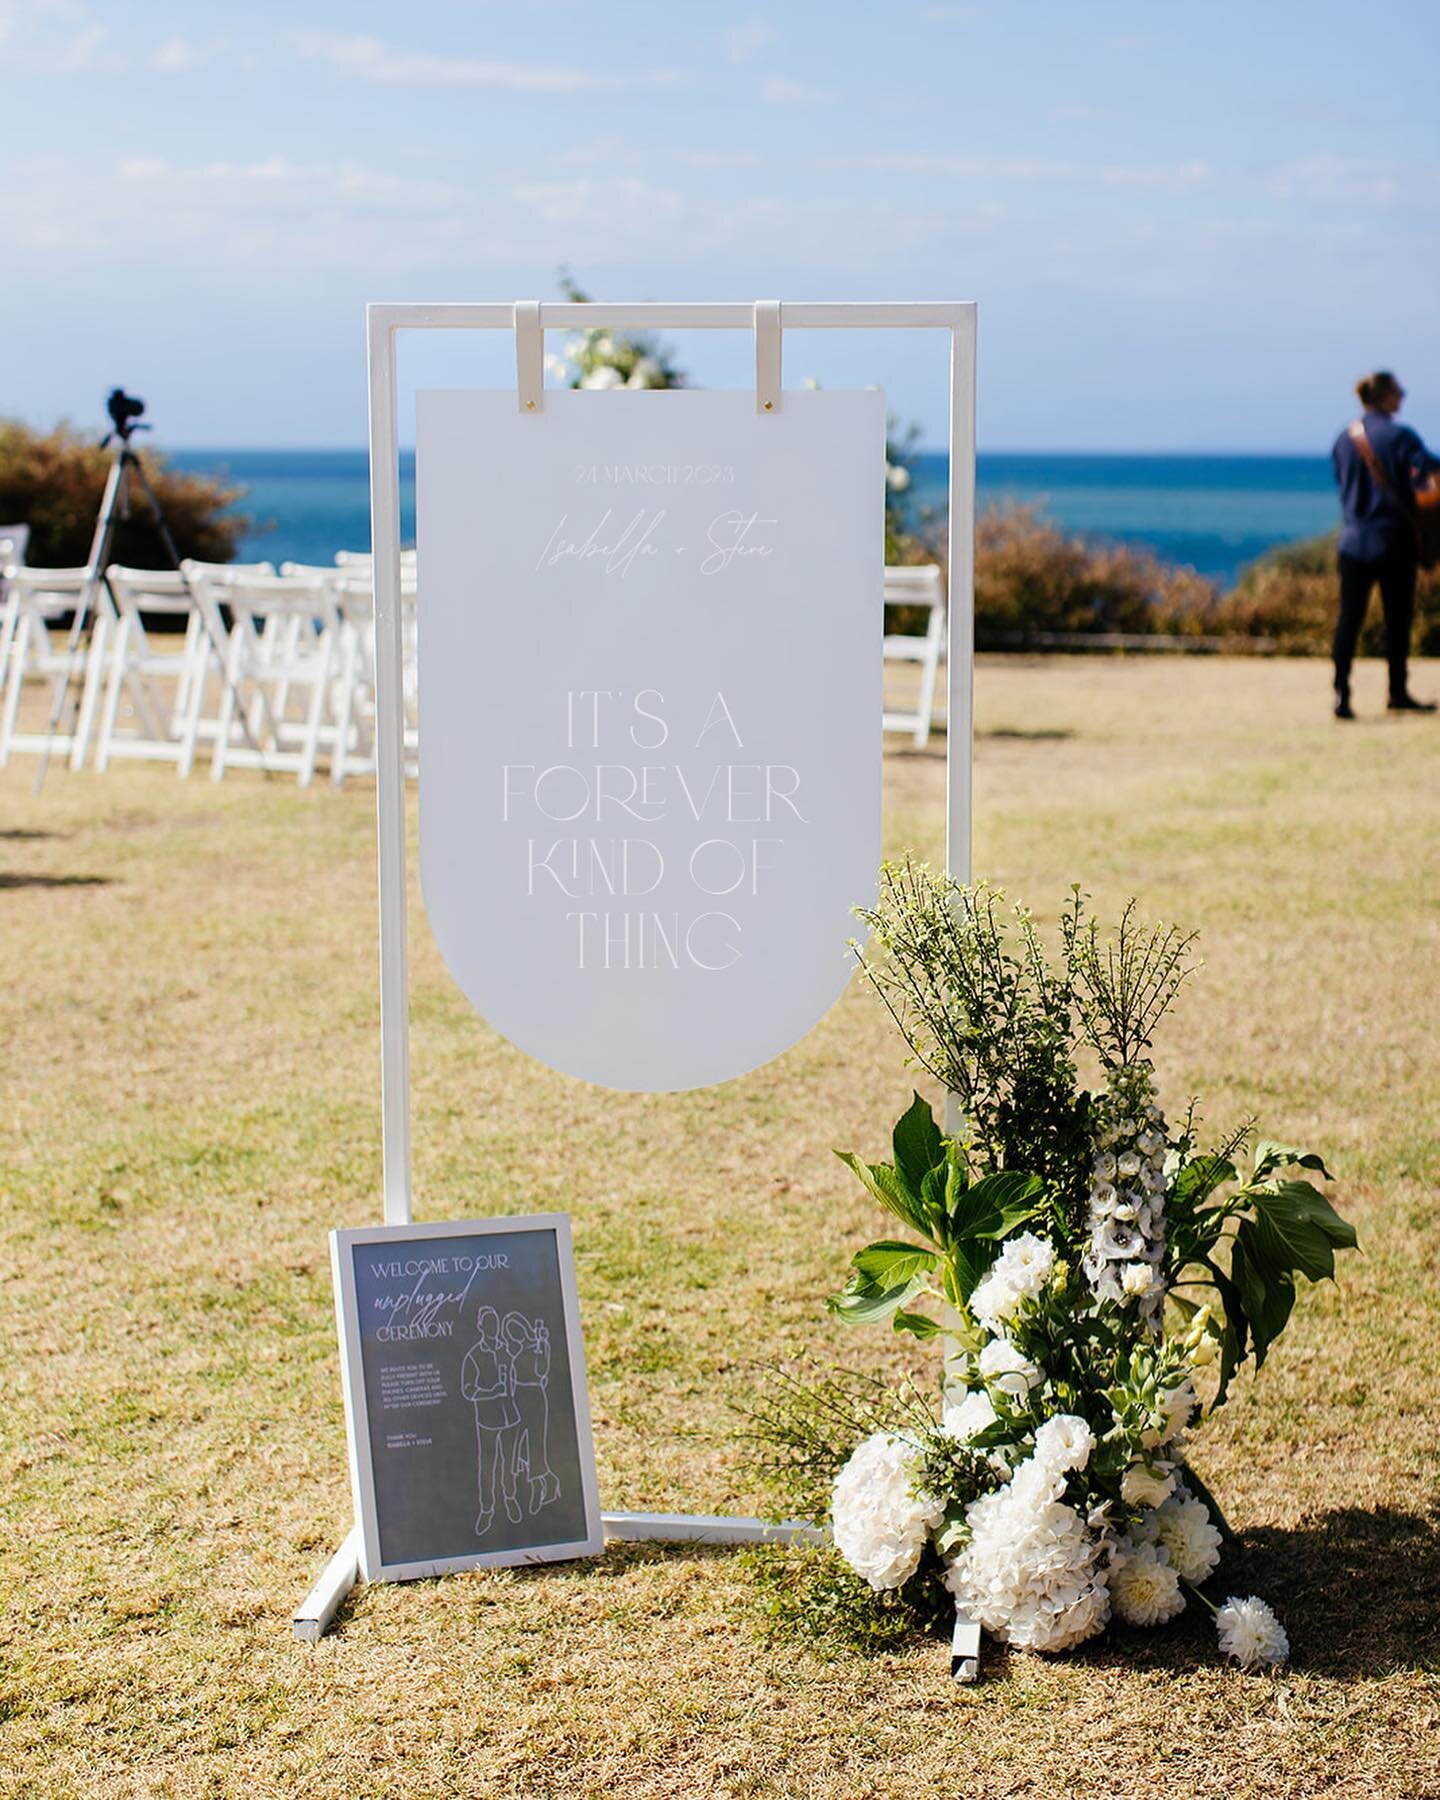 Ooh, I am so excited to share these wonderful photos from Isabella &amp; Steve&rsquo;s wedding from earlier this year! 🤍

The brief was simple, a minimal, classic design, with an elegant typeface across all pieces, which included welcome, seating ch